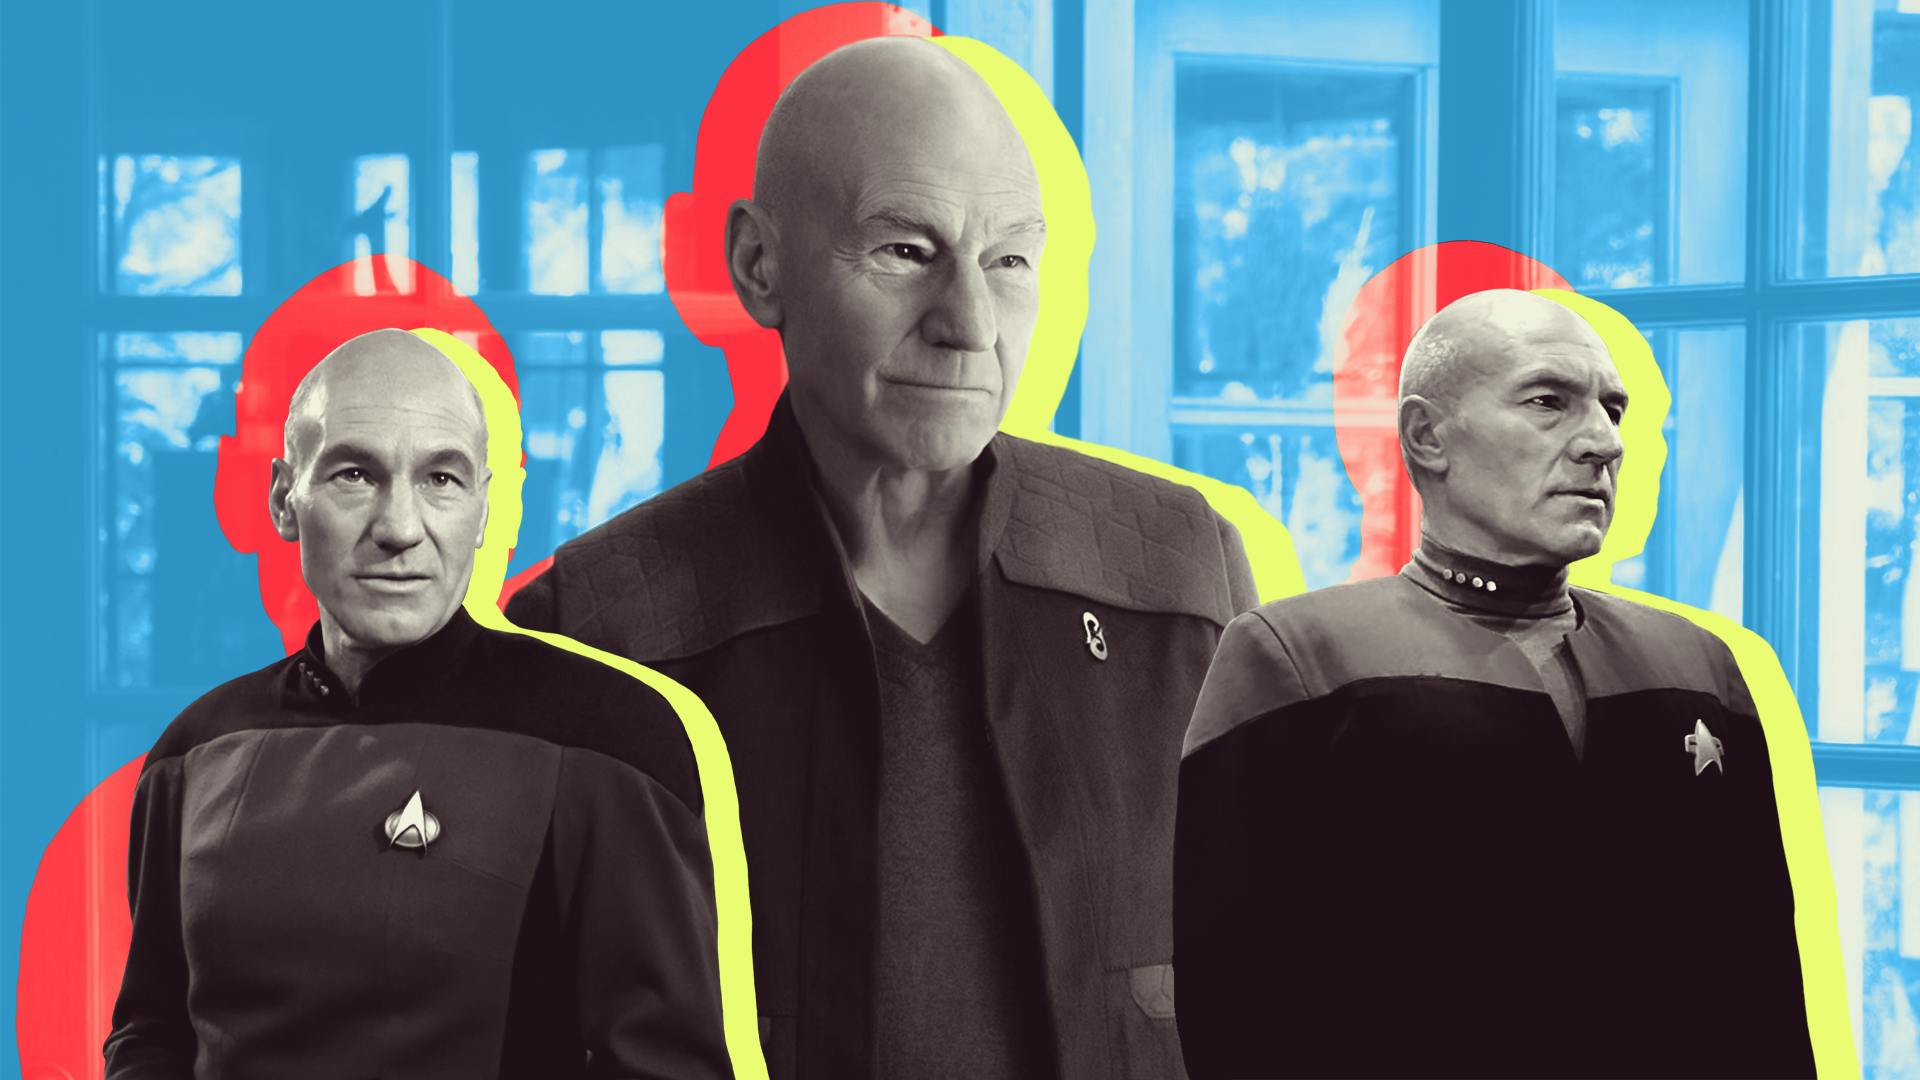 Collage featuring Jean-Luc Picard in Star Trek: The Next Generation, Star Trek Generations and Star Trek: Picard